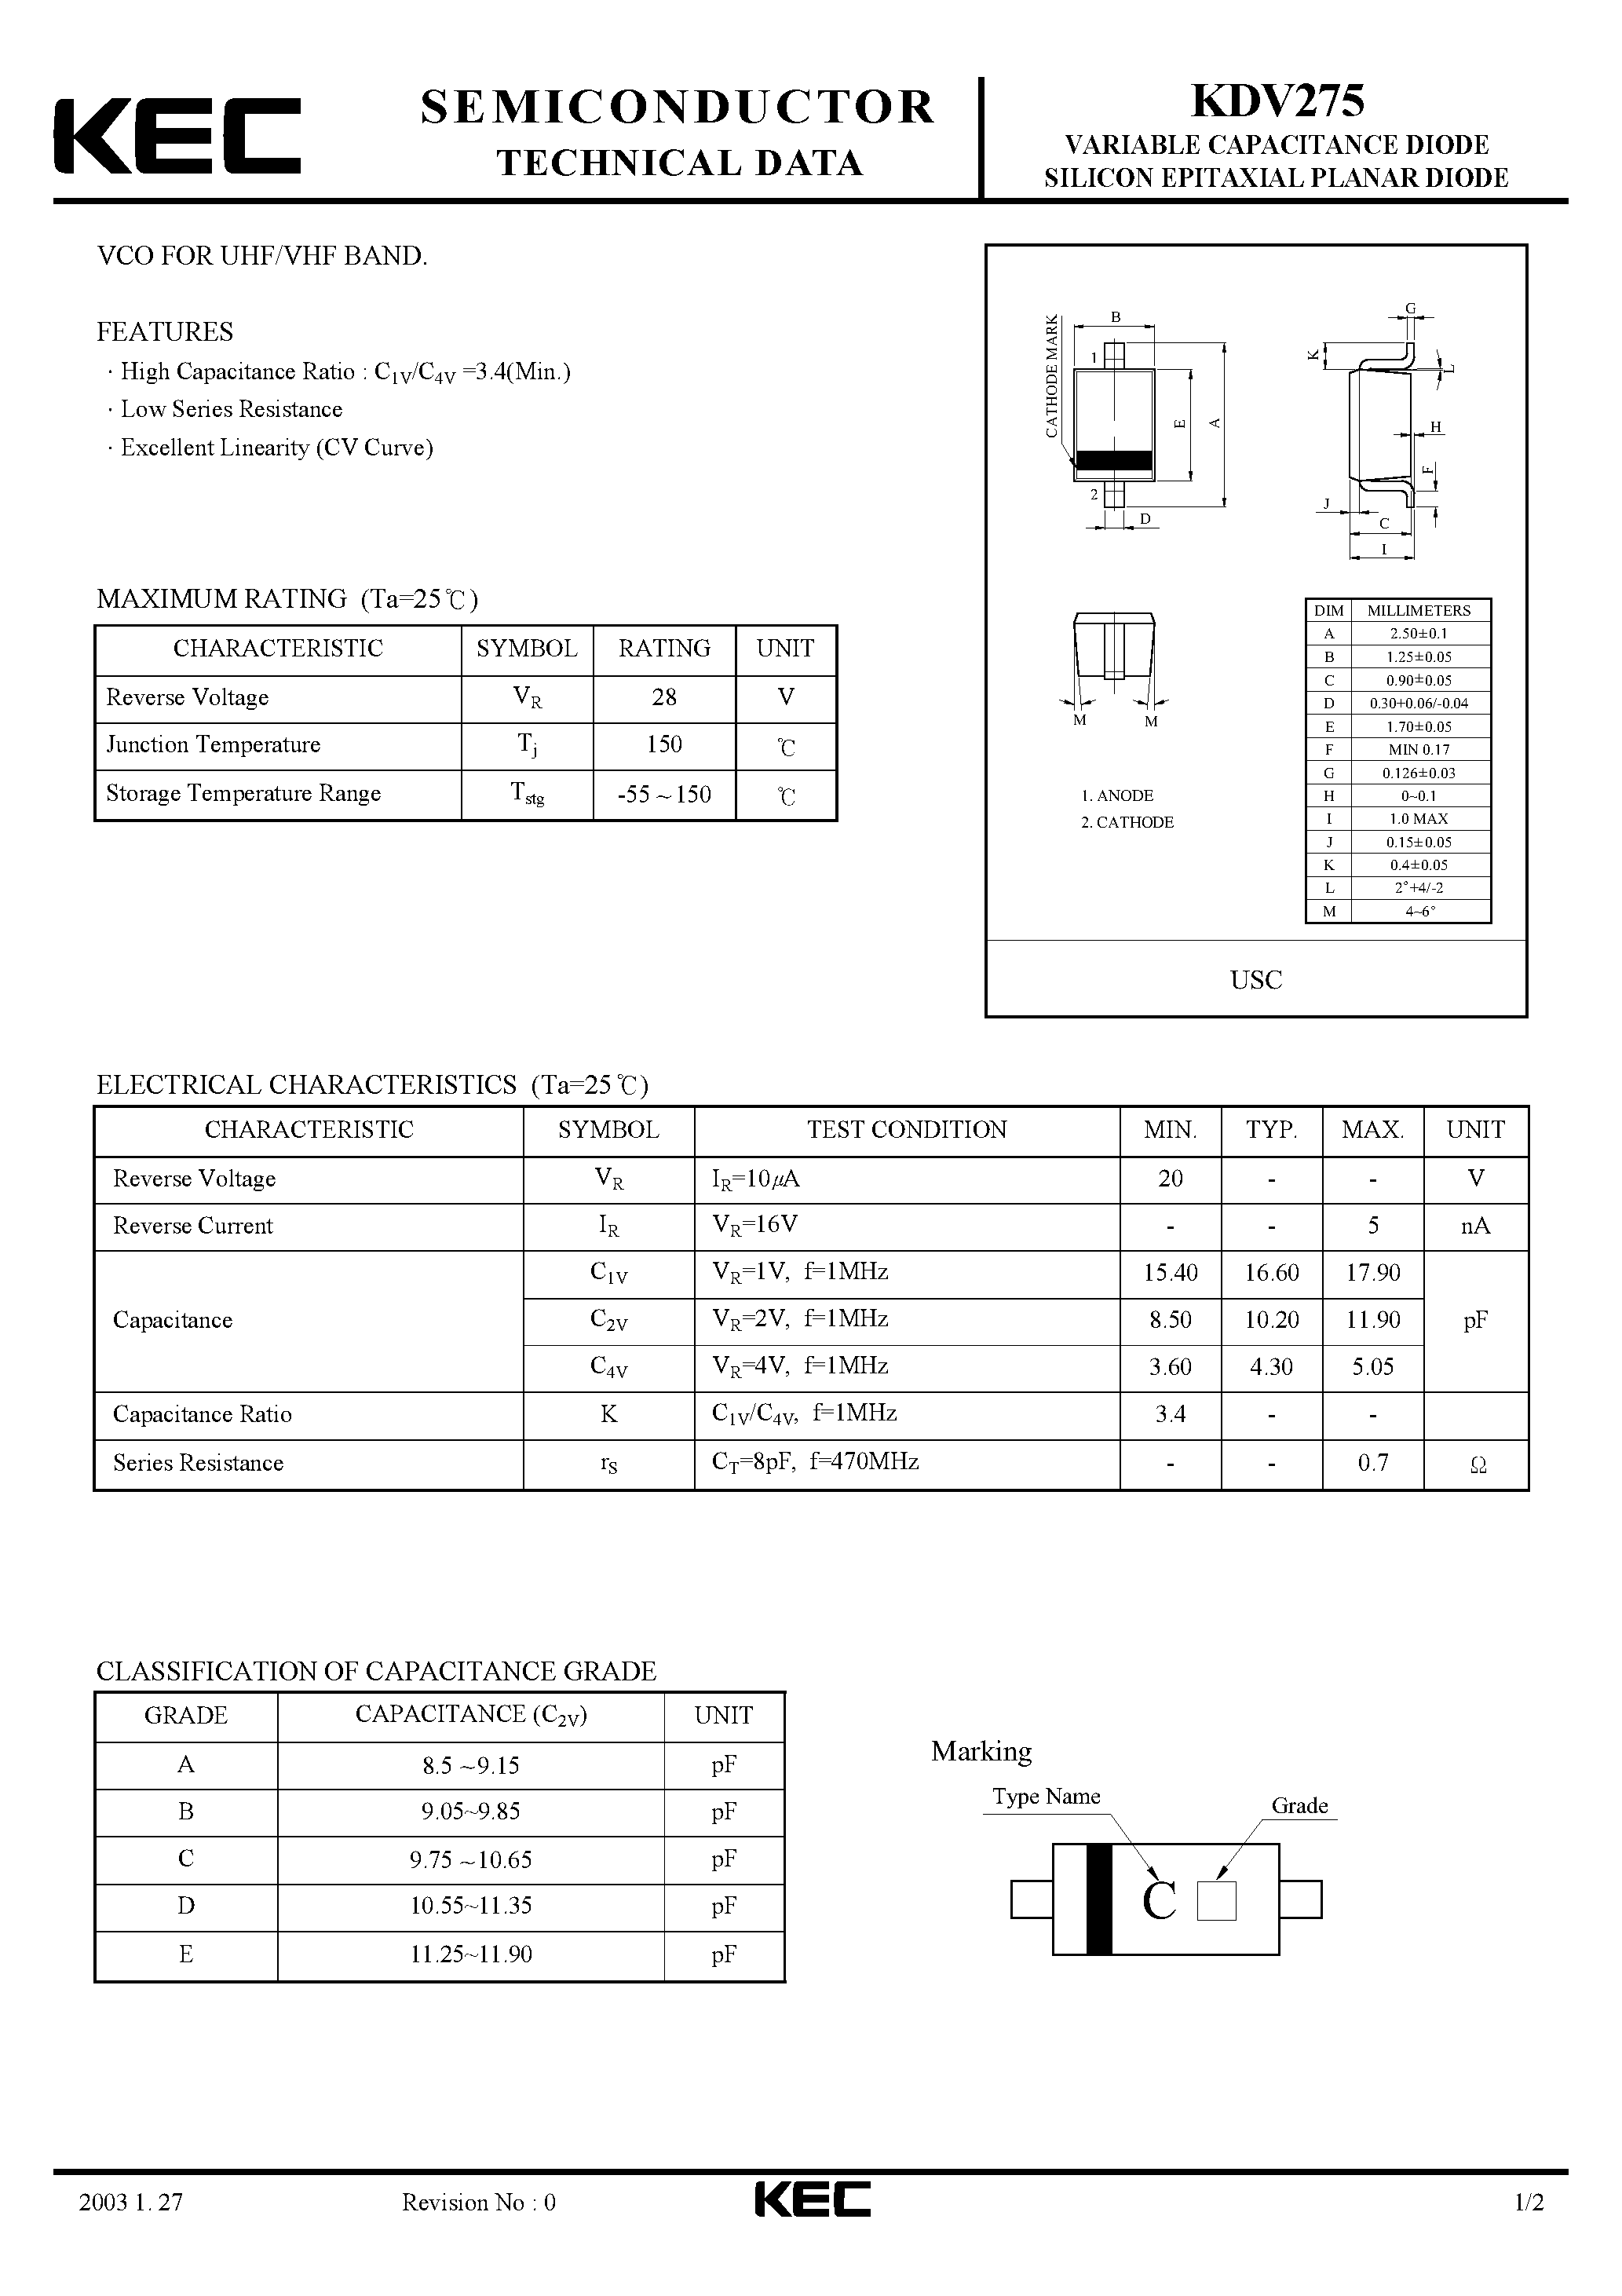 Datasheet KDV275 - VARIABLE CAPACITANCE DIODE SILICON EPITAXIAL PLANAR DIODE(VCO FOR UHF/VHF BAND) page 1